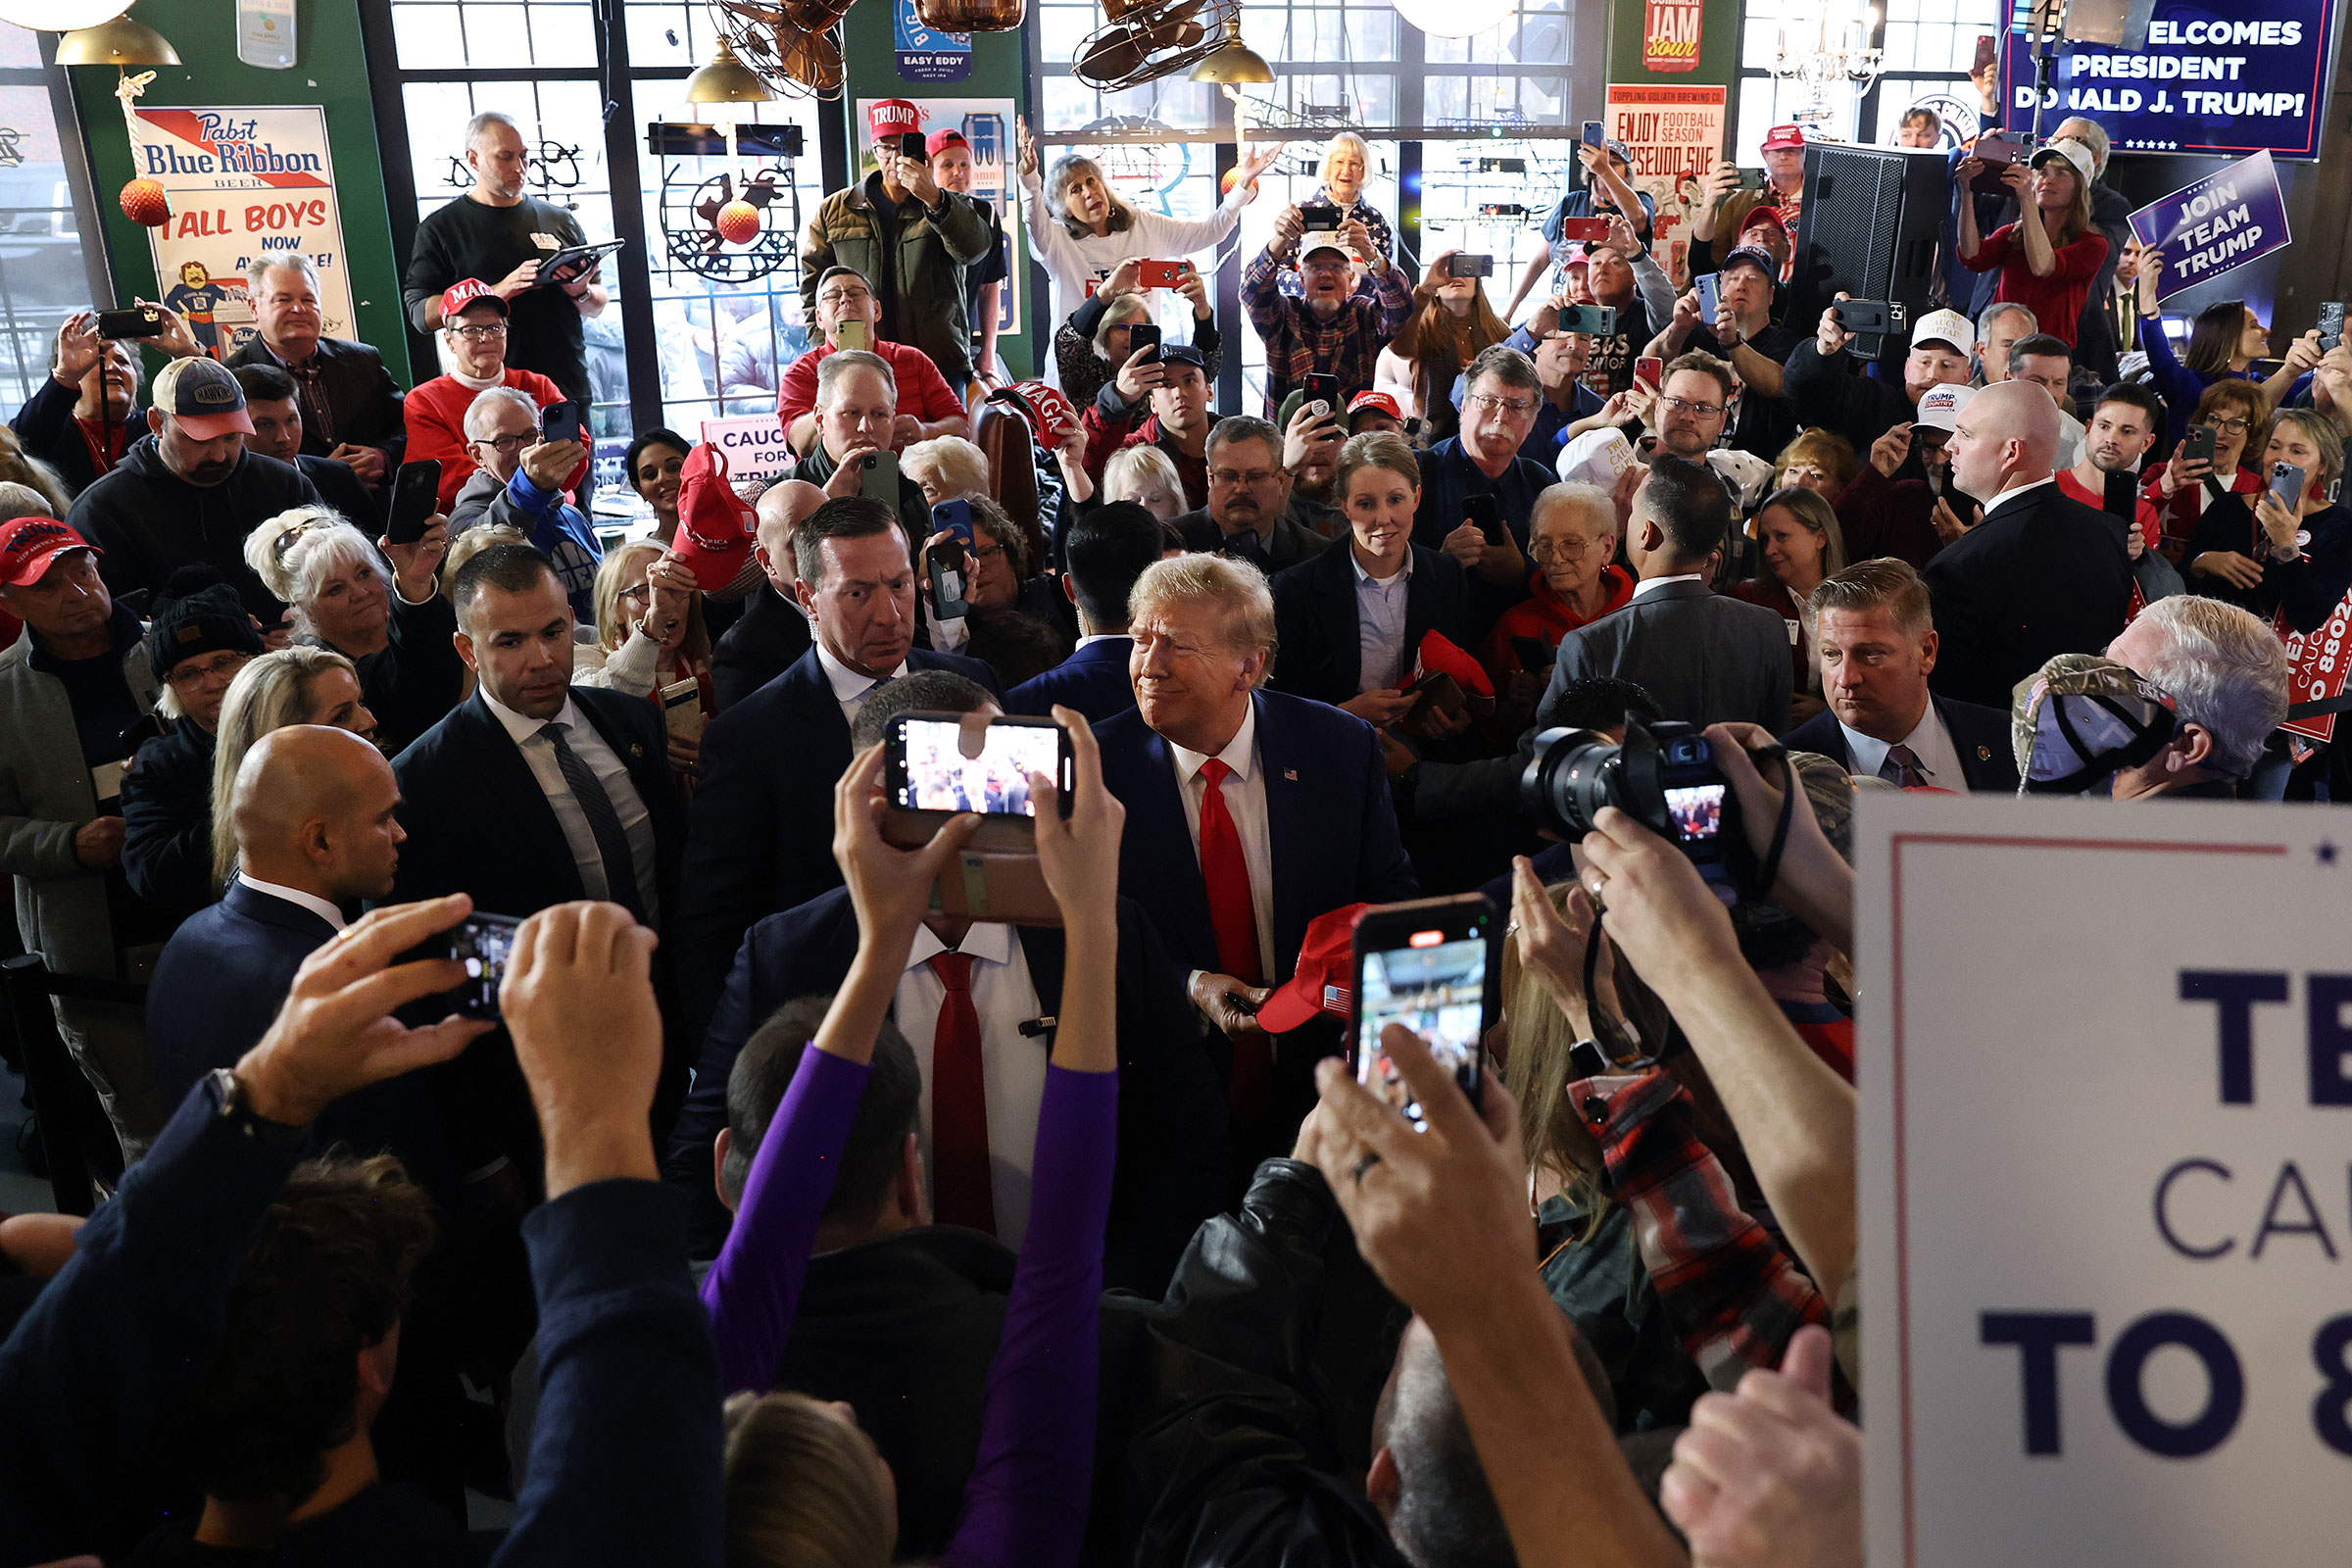 Former President Donald Trump greets guests as he arrives at a commit to caucus campaign event at the Whiskey River bar on December 2, in Ankeny, Iowa.